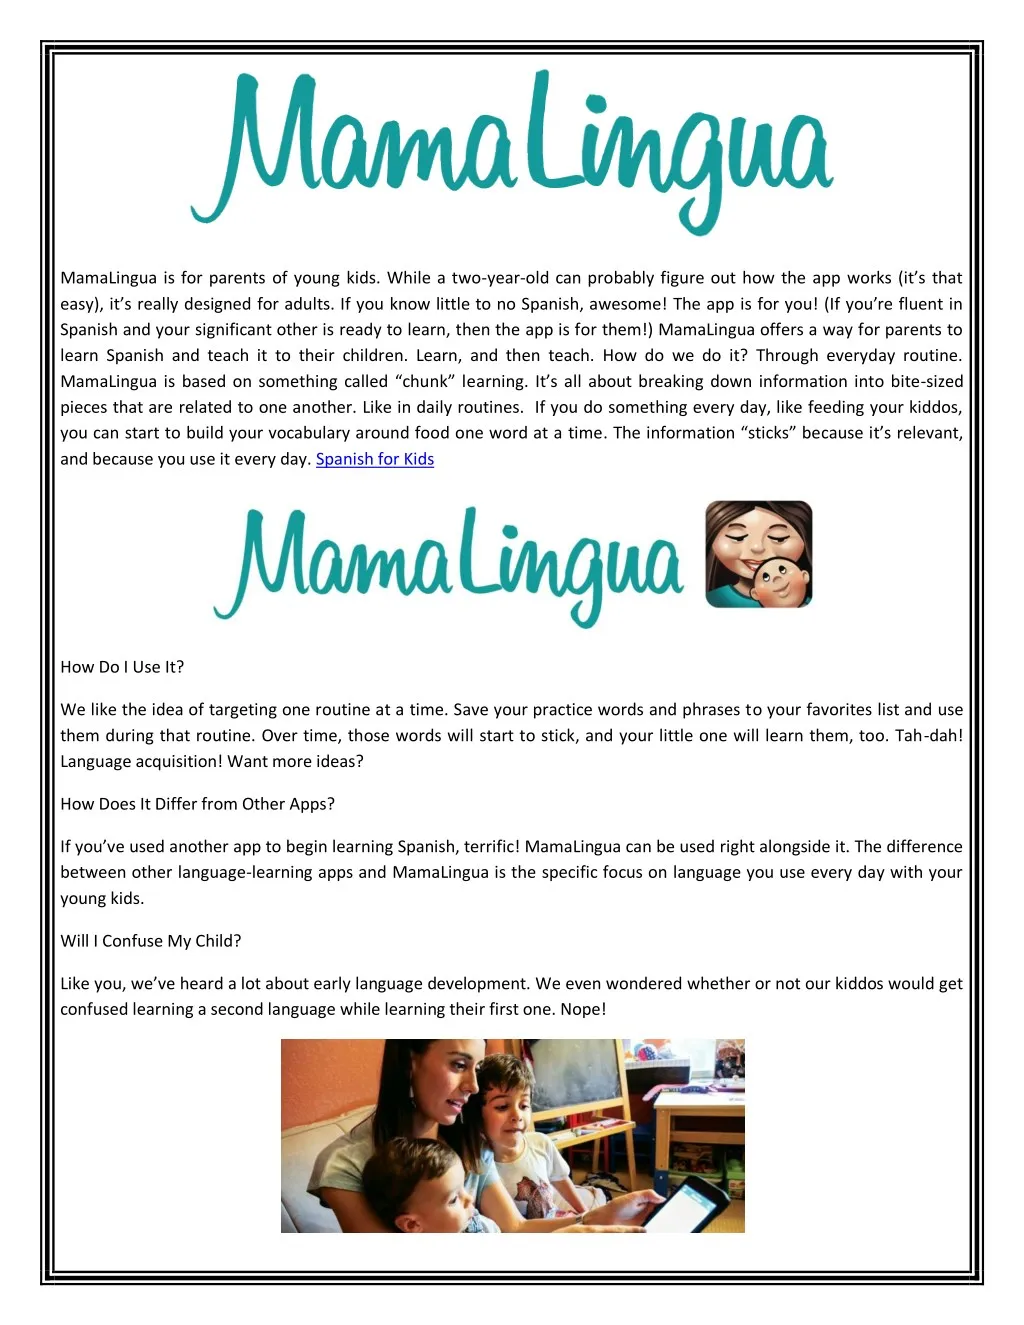 mamalingua is for parents of young kids while